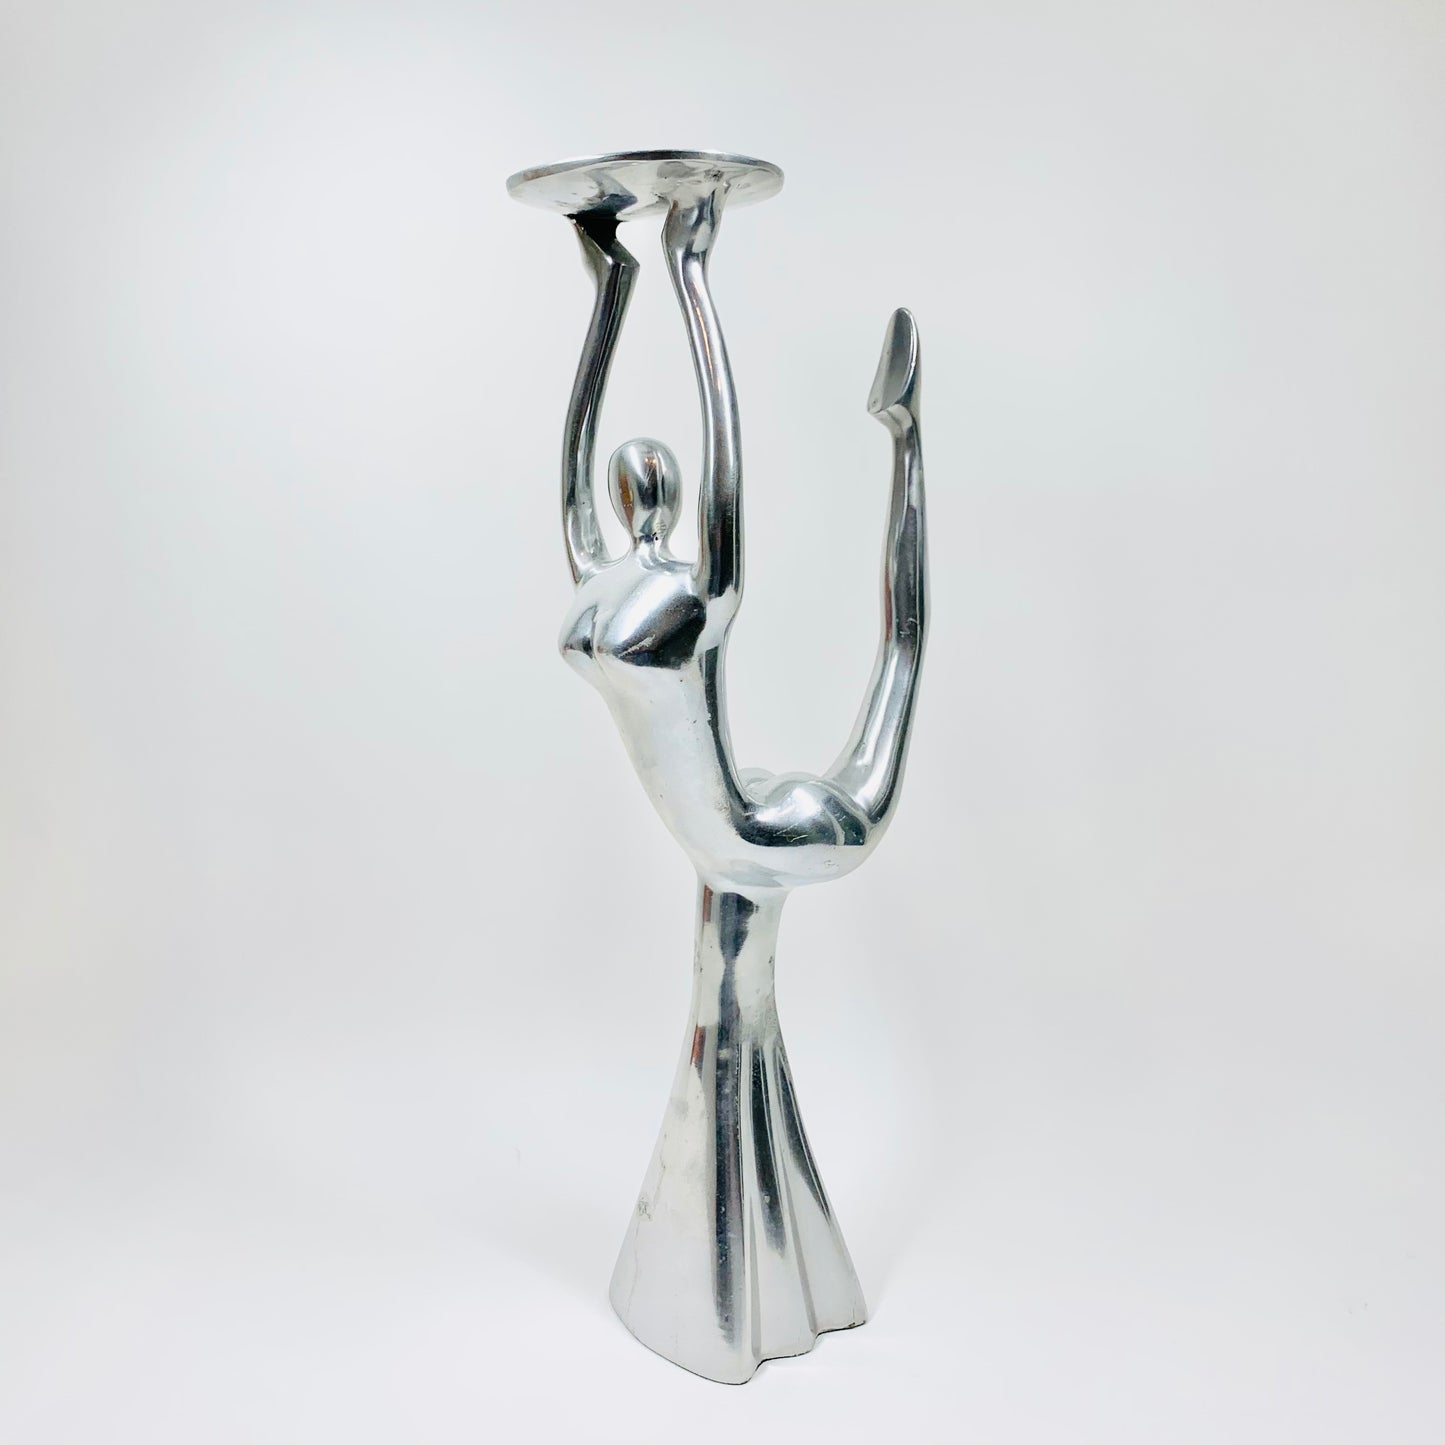 Rare 1980s post-modern chrome steel dancing nude sculpture/candle holder